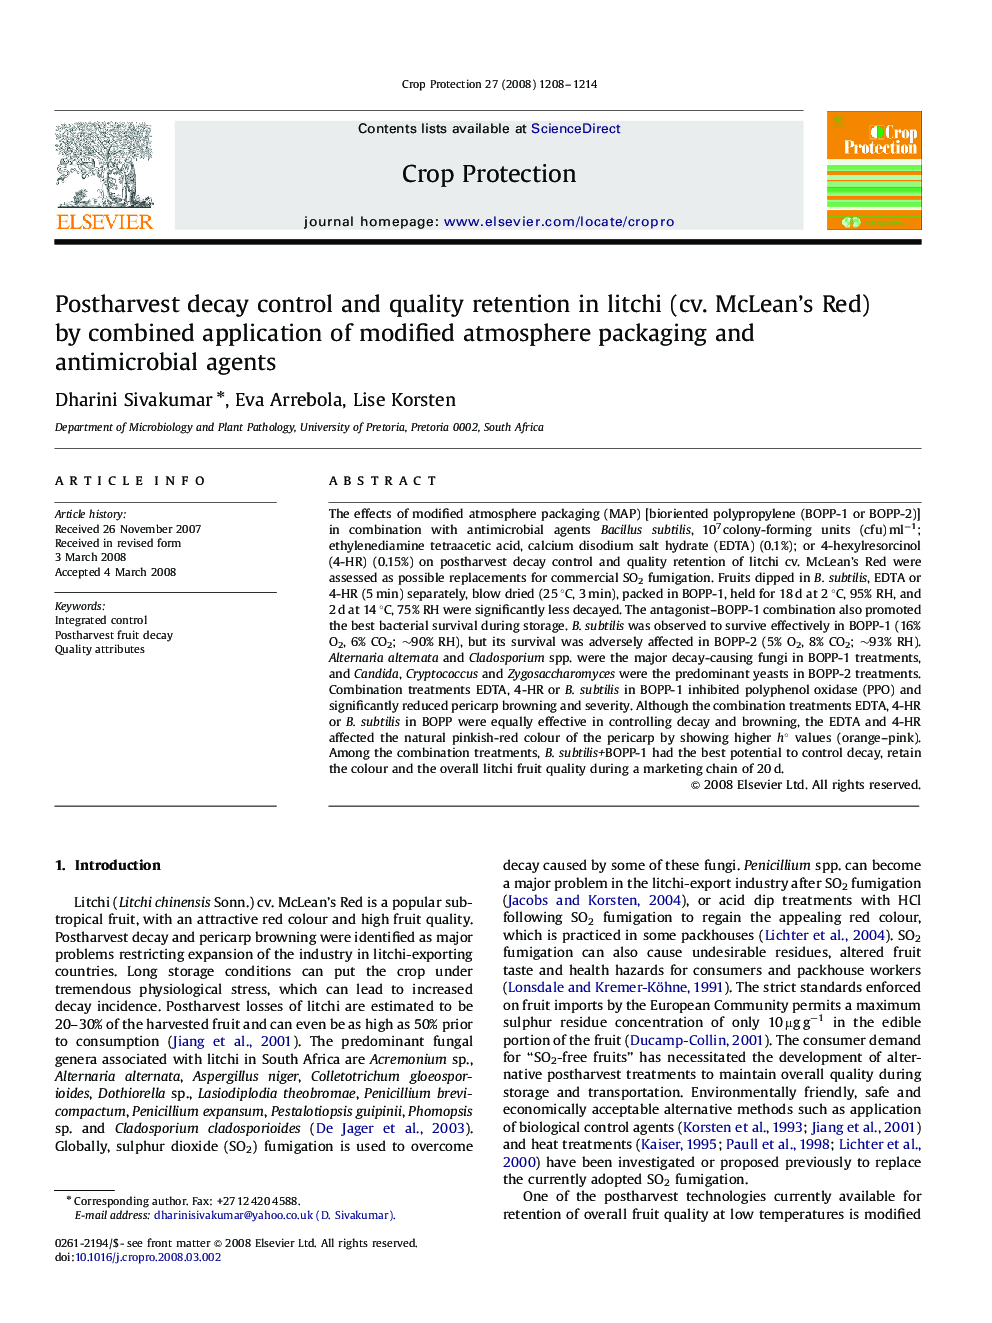 Postharvest decay control and quality retention in litchi (cv. McLean's Red) by combined application of modified atmosphere packaging and antimicrobial agents